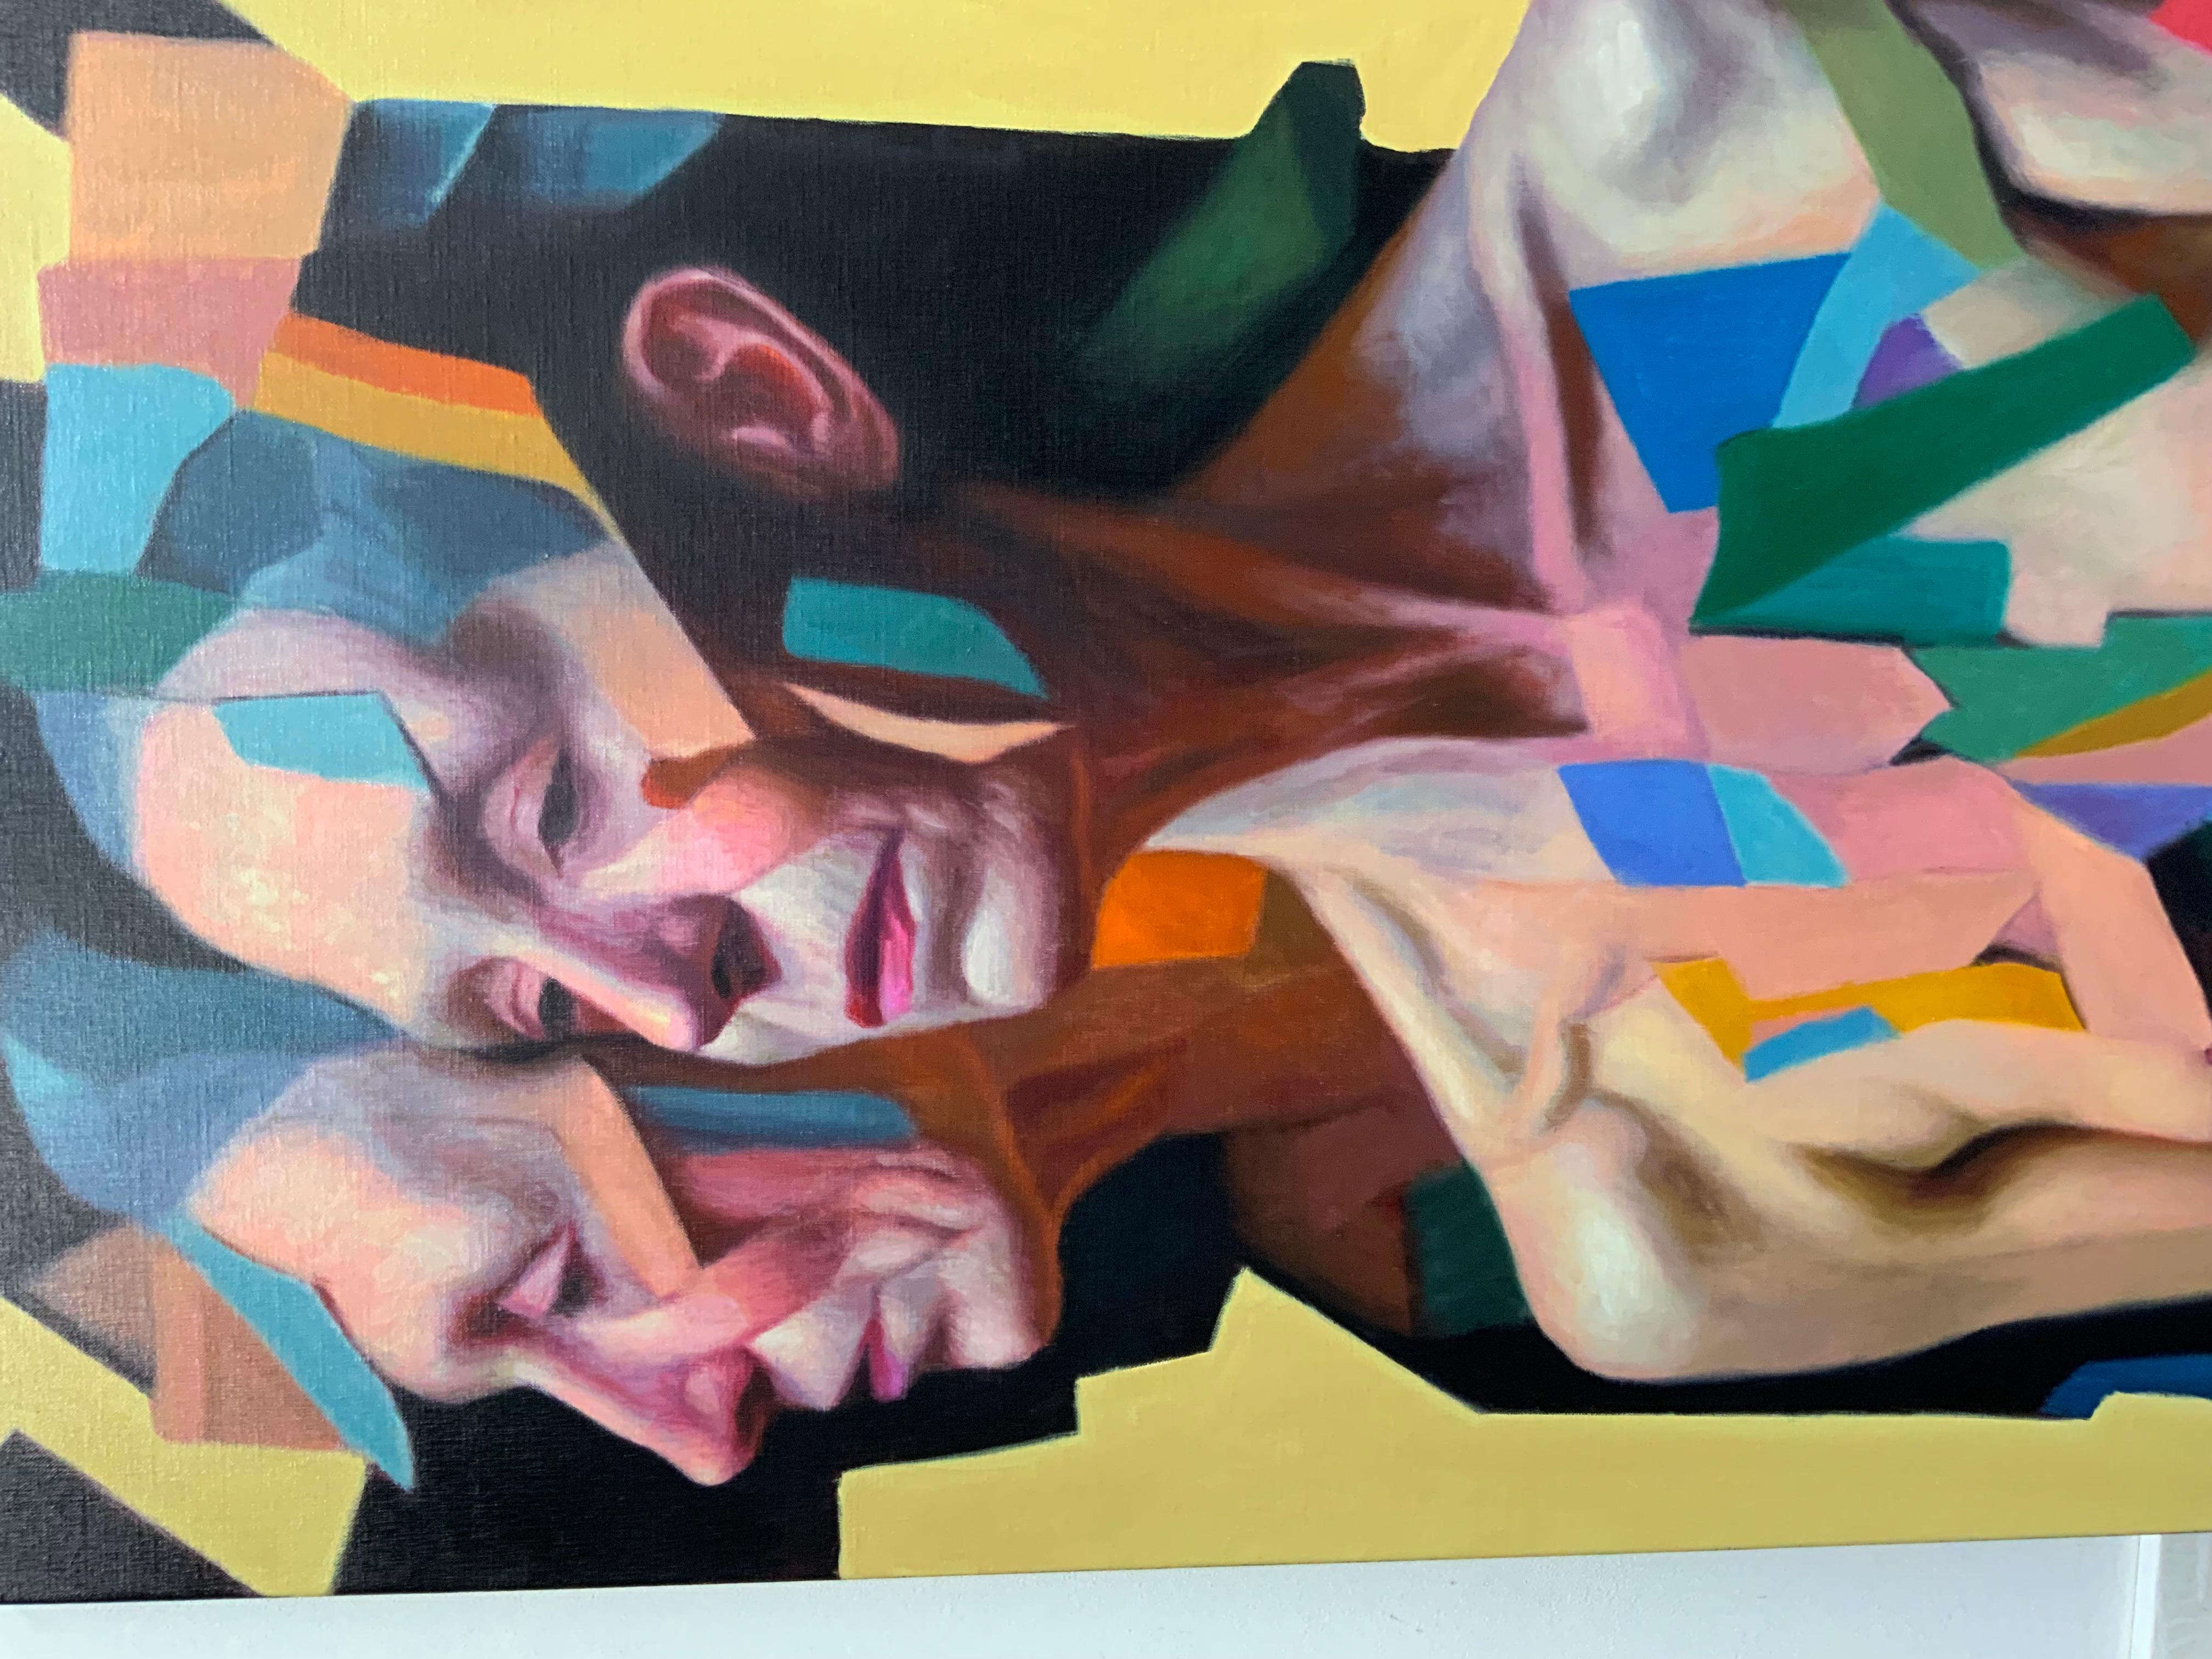 
Francien Krieg, a contemporary Dutch artist, gives a new dimension to figurative painting with her penetrating and unfiltered portraits. Krieg, who received her art education at the Royal Academy of Fine Arts in The Hague, has an oeuvre celebrated